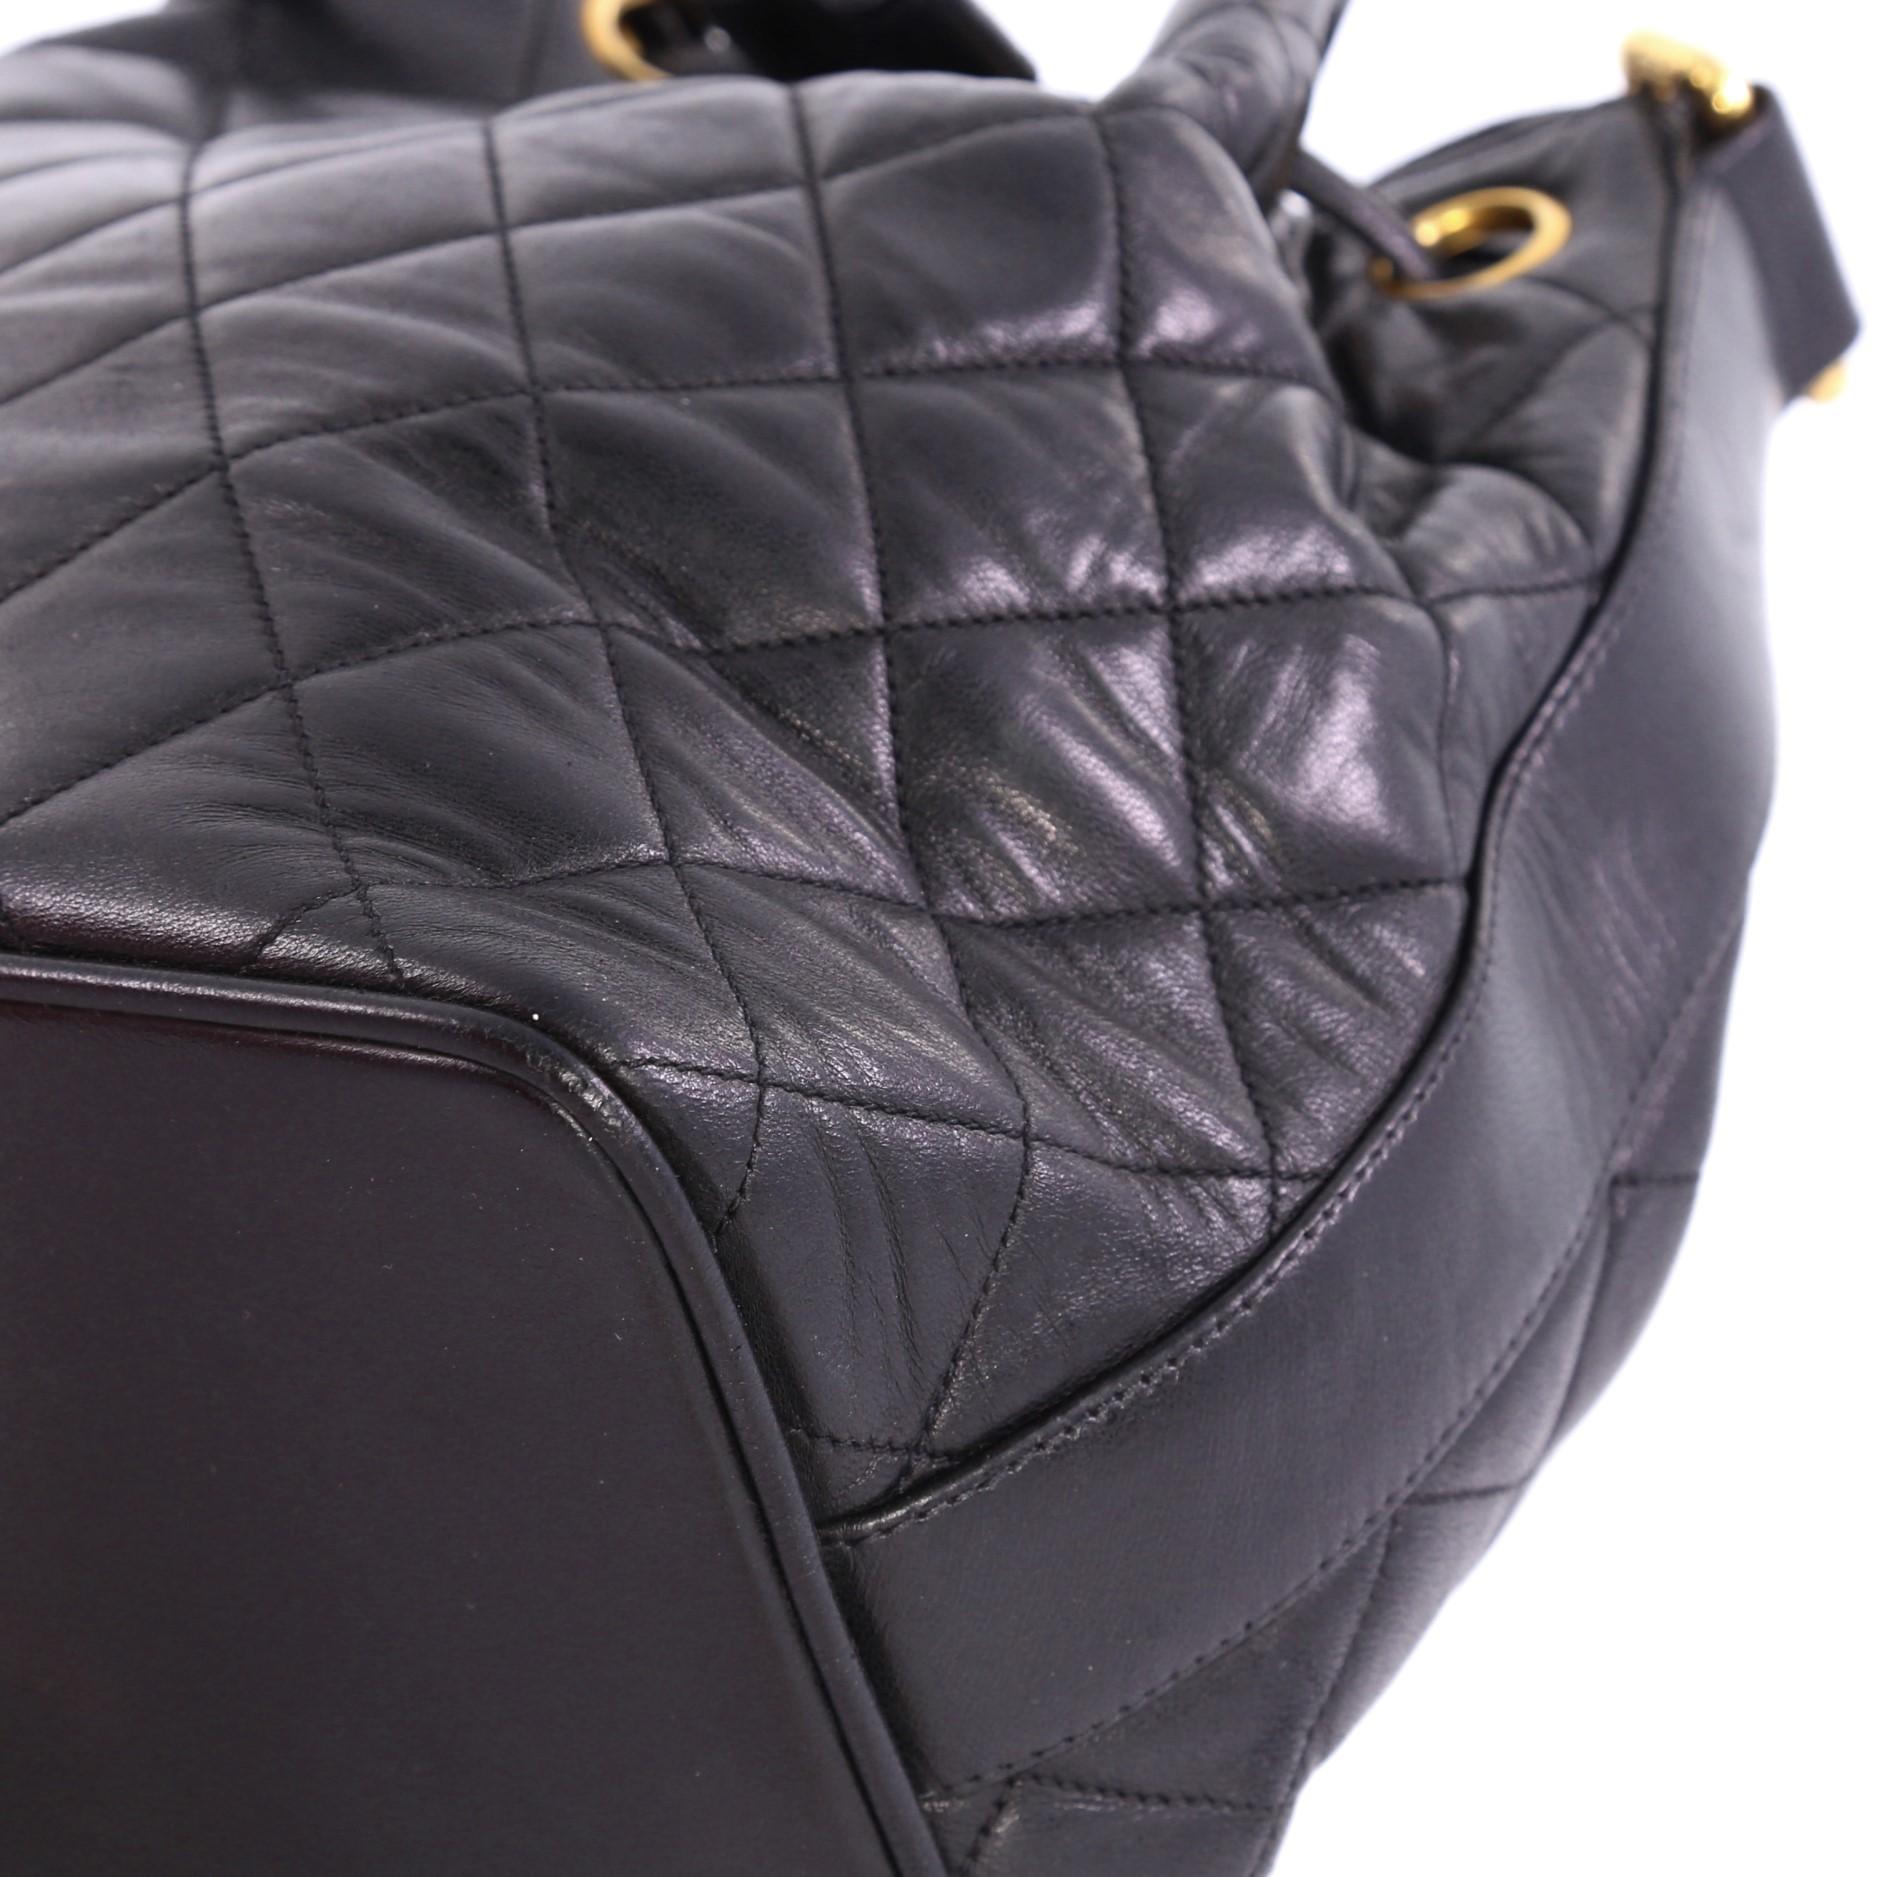 Black Chanel Vintage Drawstring Bucket Bag Quilted Lambskin Small